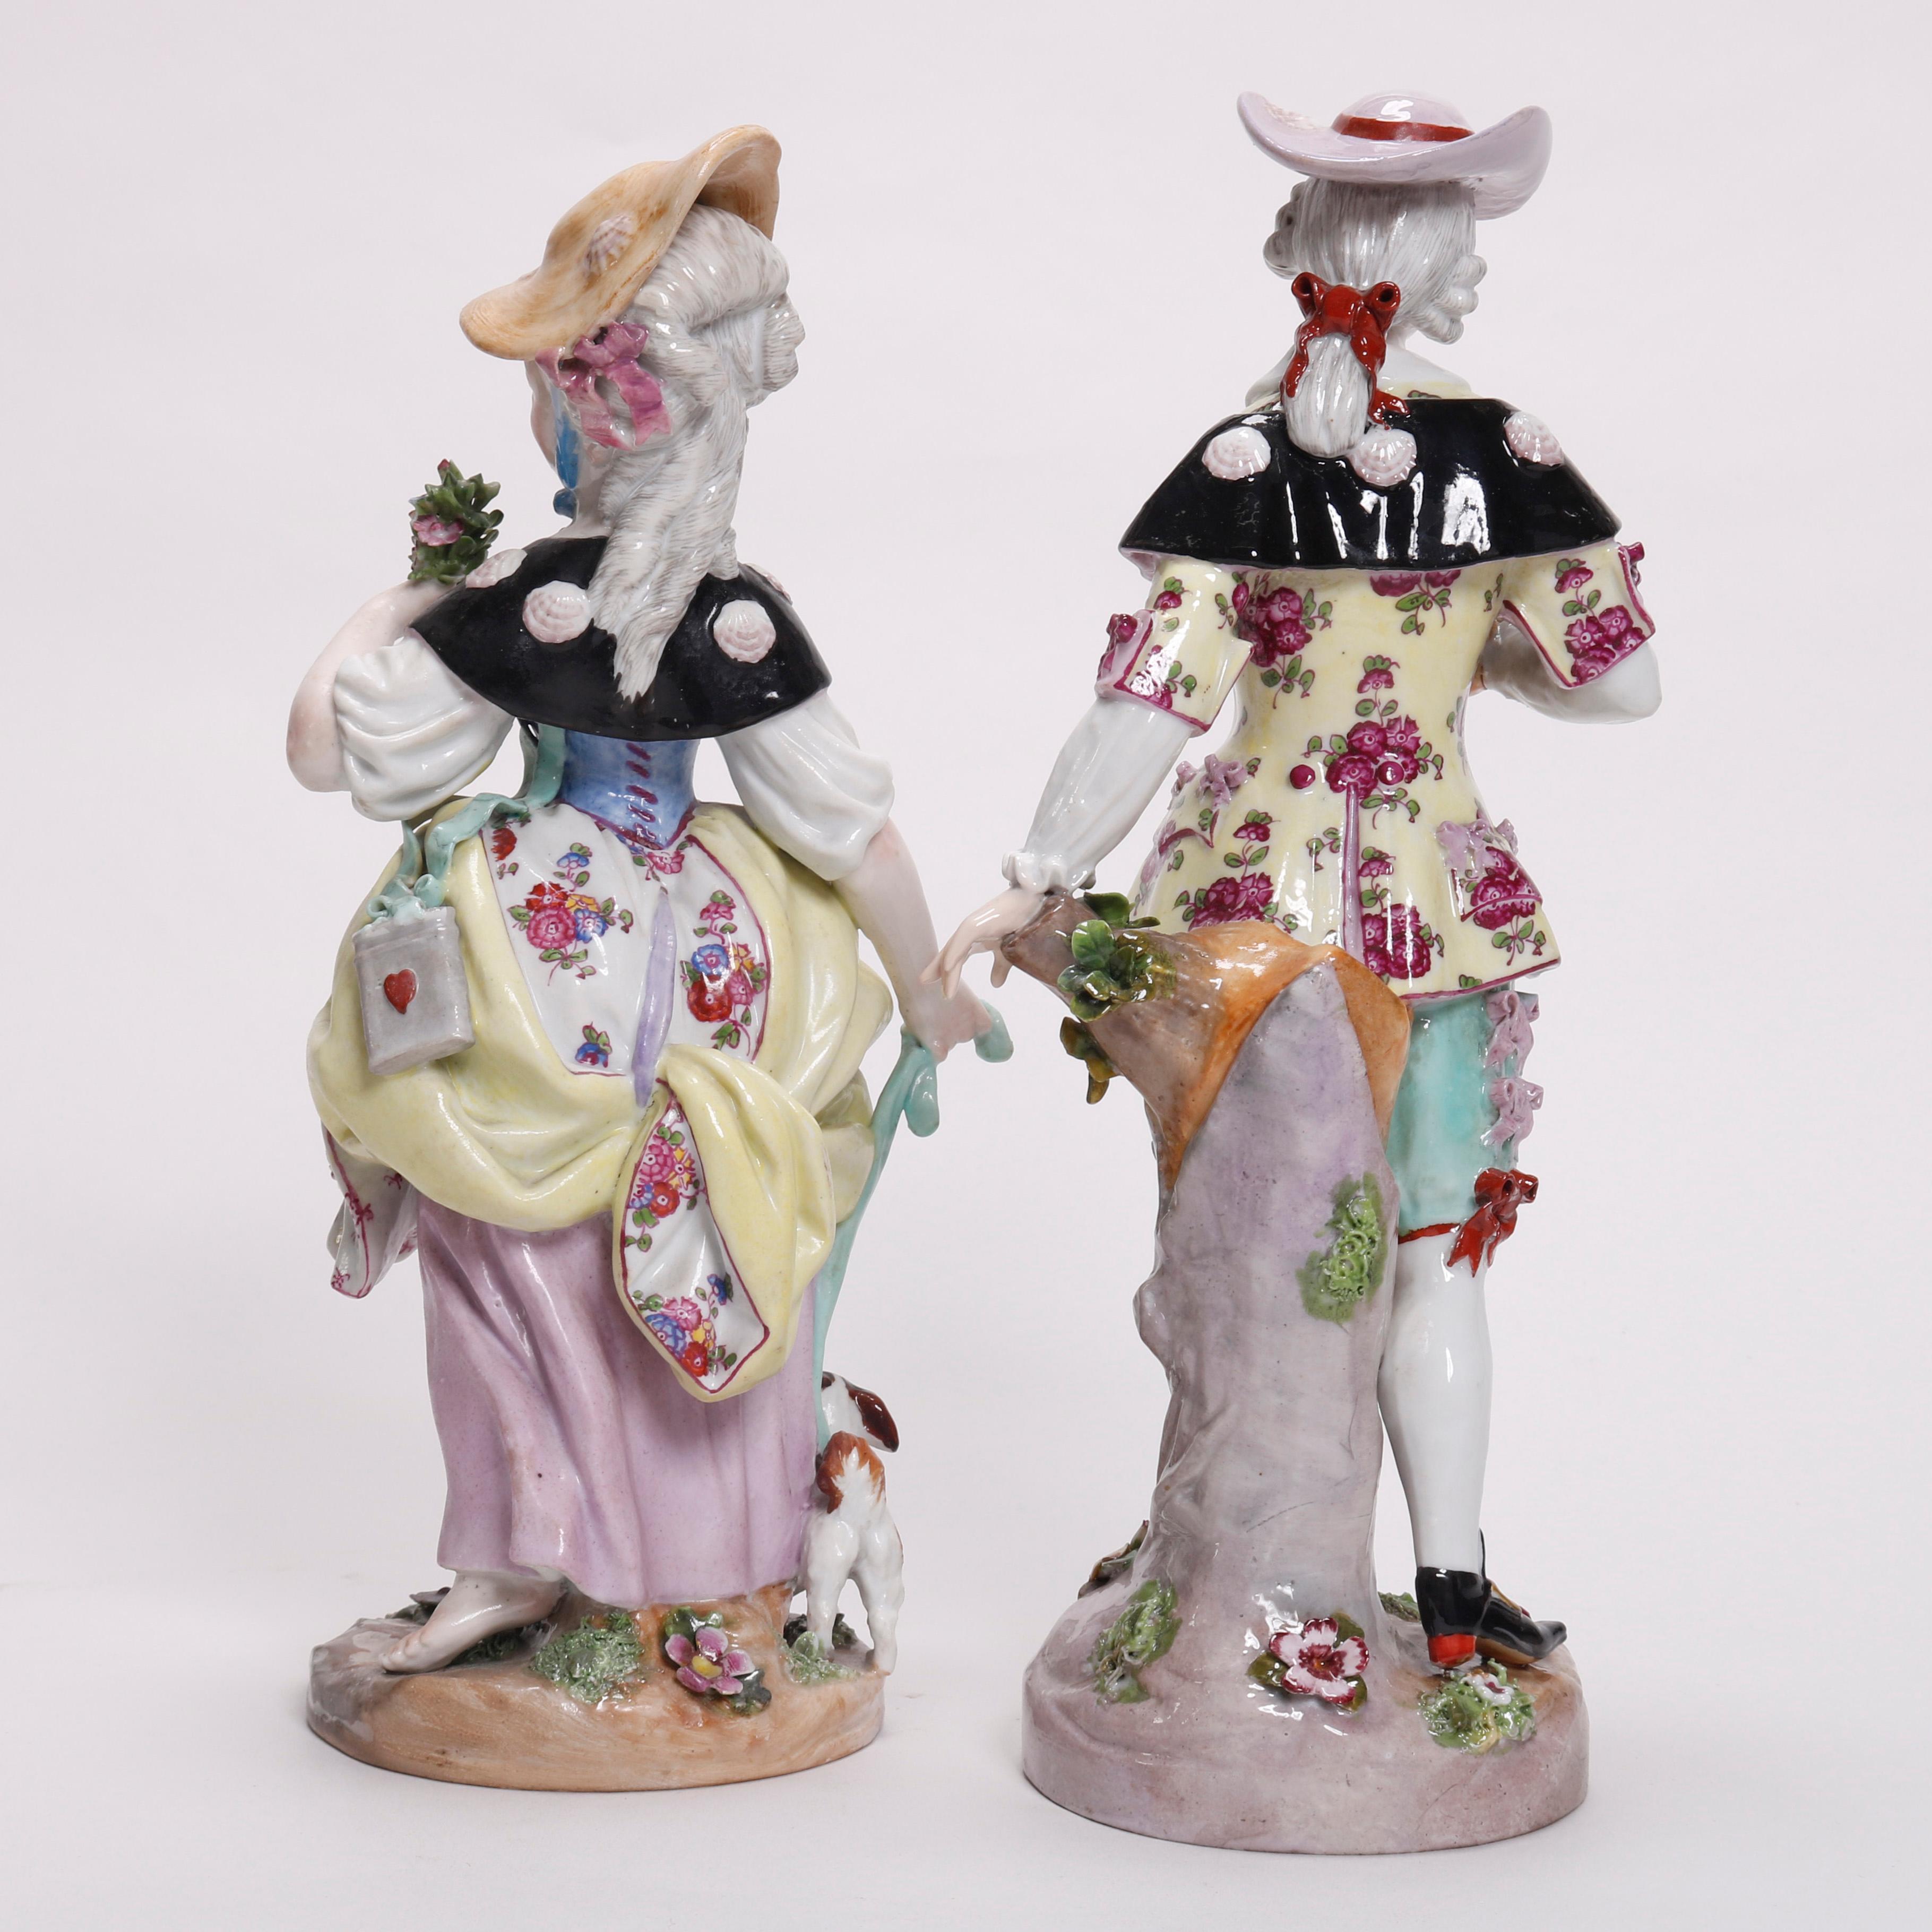 Hand-Painted Antique German Hand Painted Meissen Porcelain Figures, Courting Couple